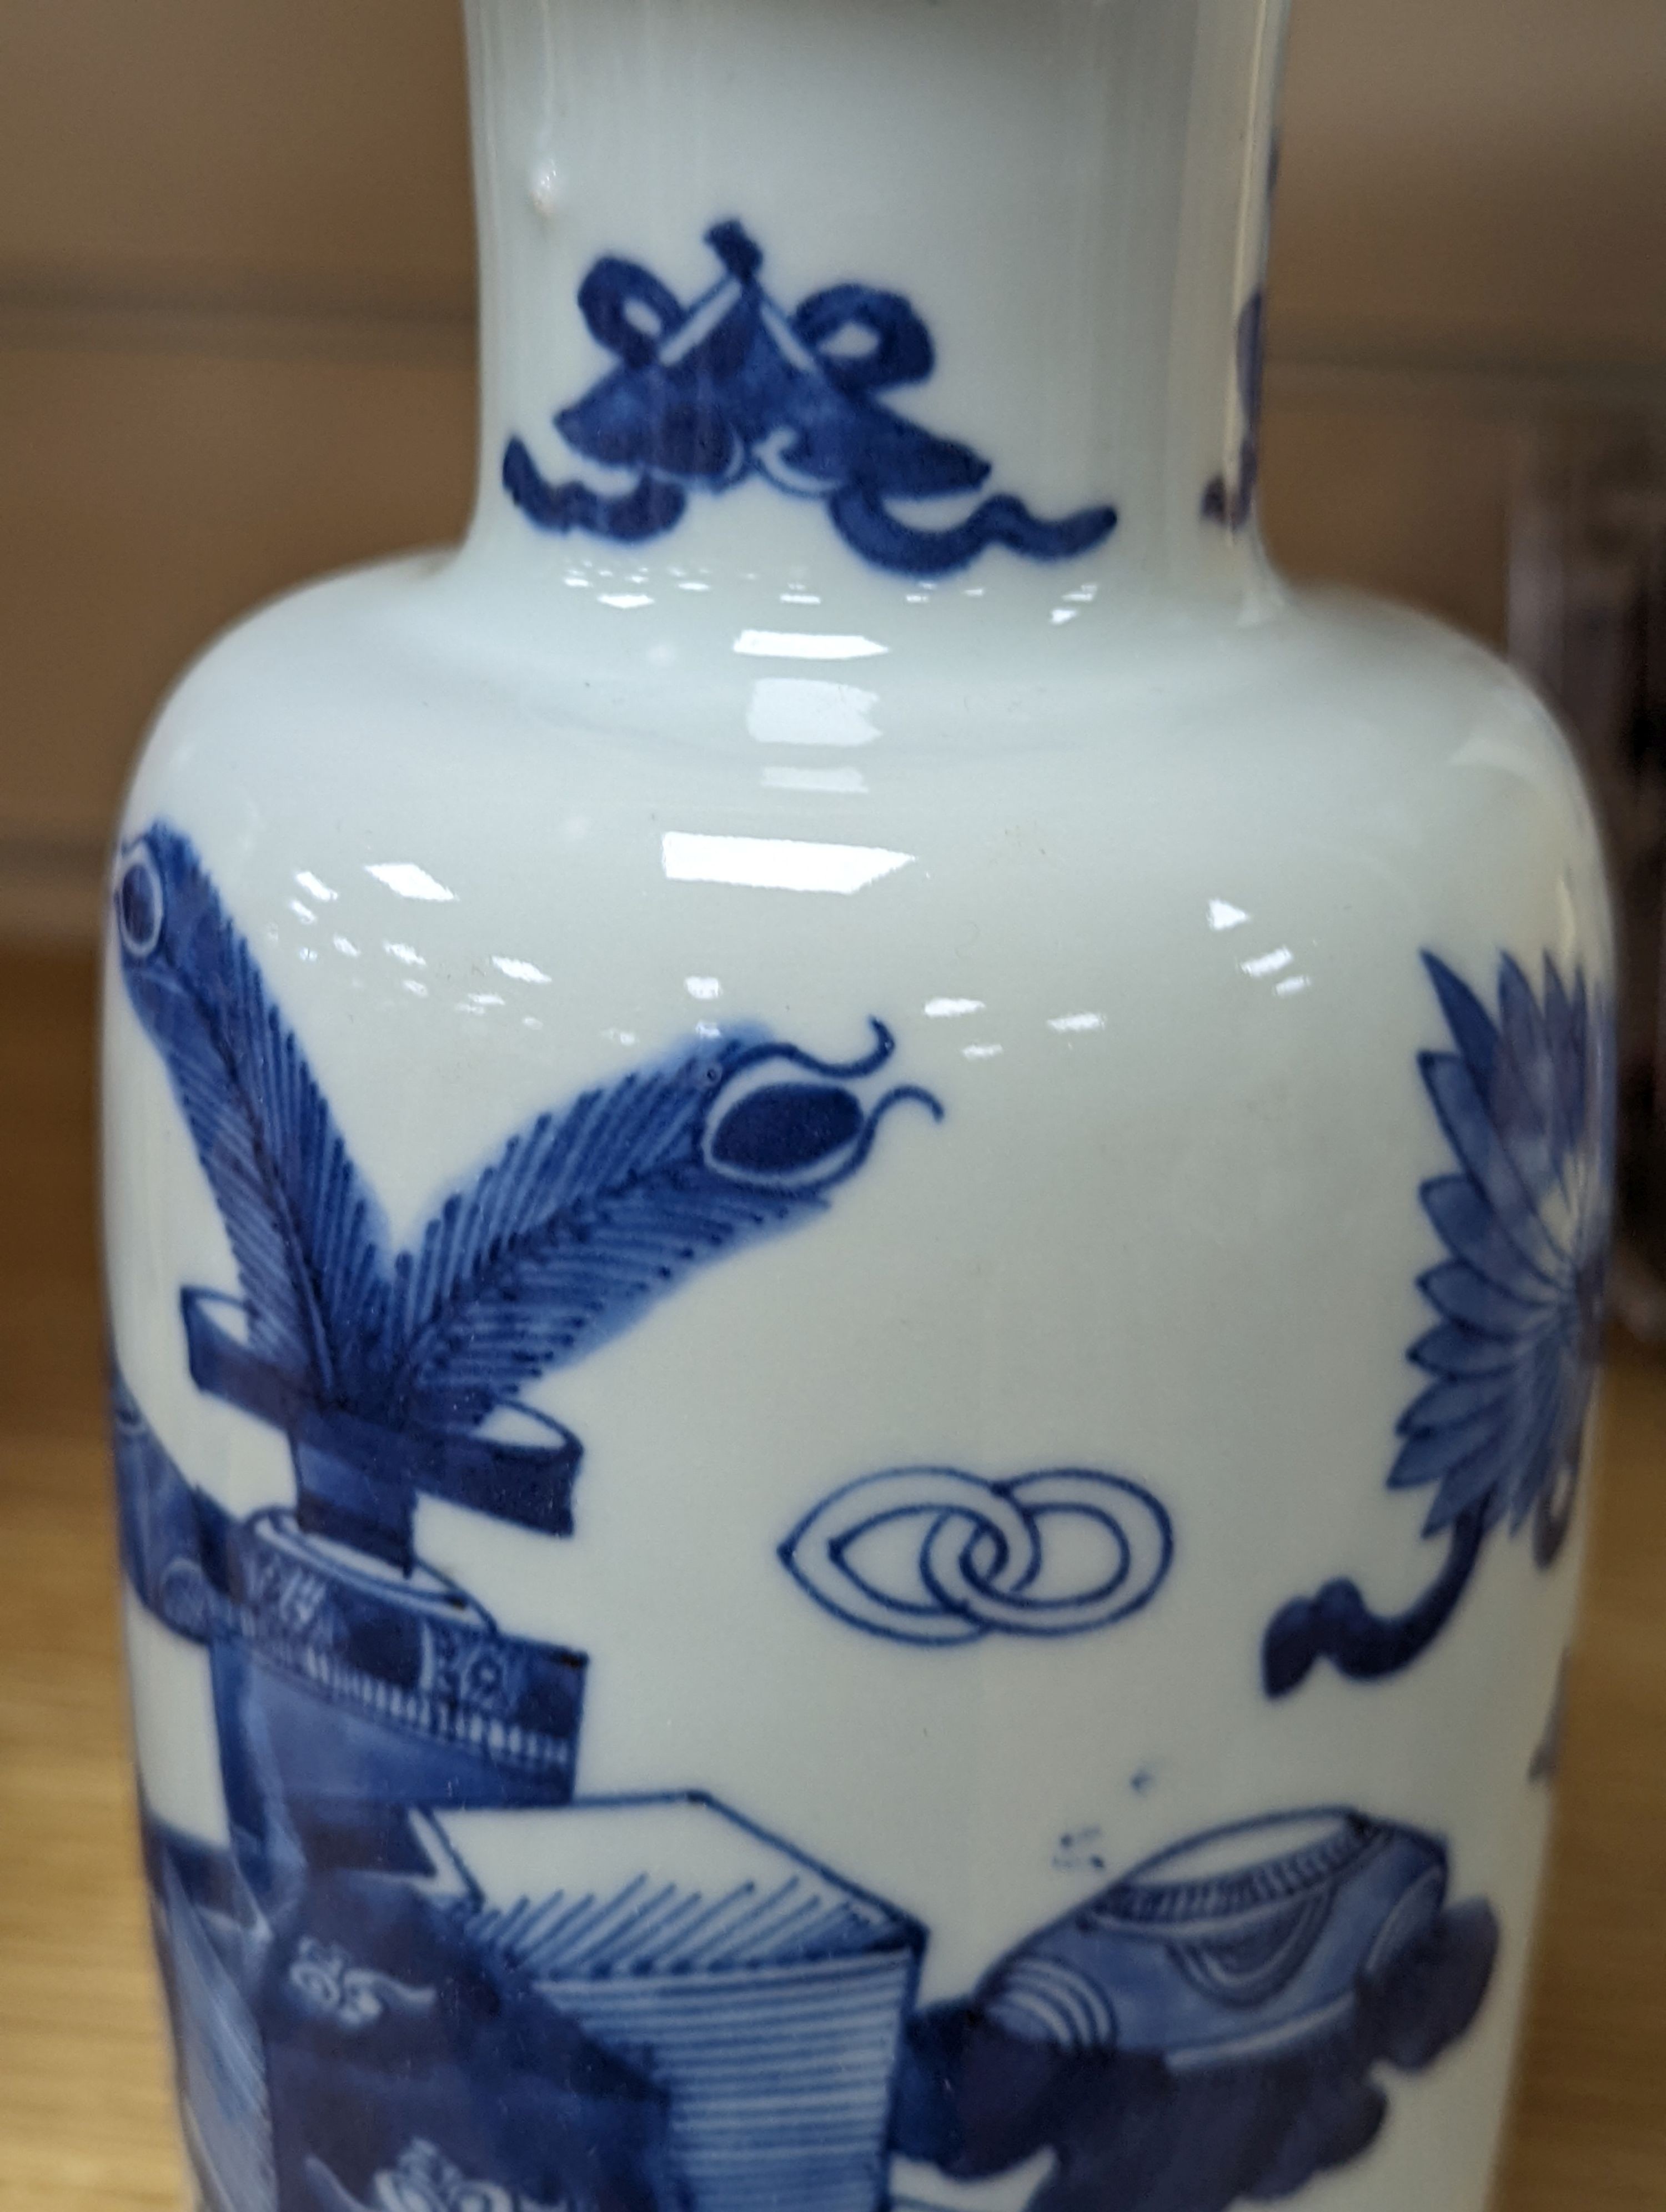 A Chinese blue and white ‘Antiques’ vase, 19.5 cms high.